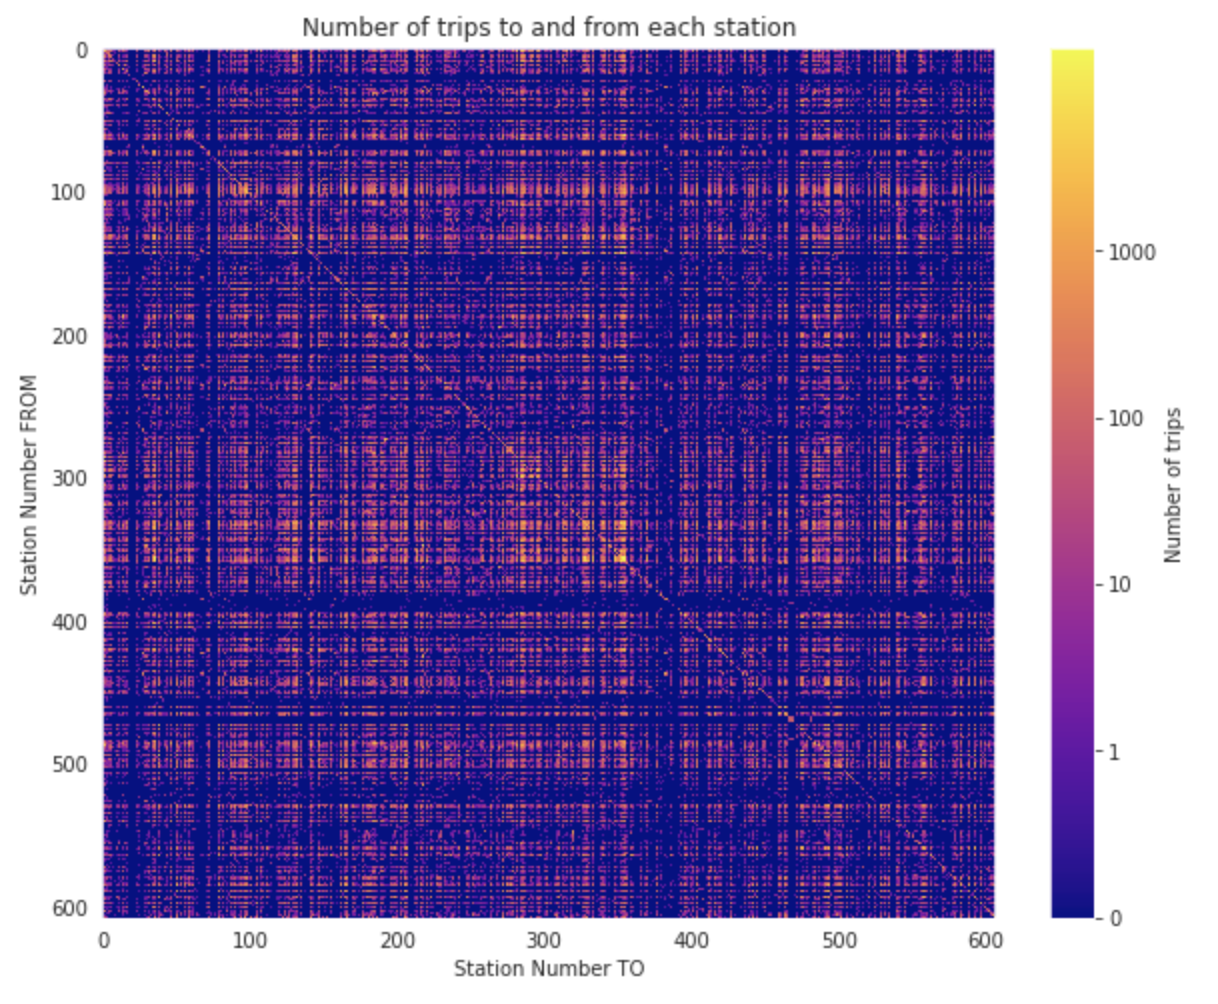 bb_from_to stations_heatmap.png